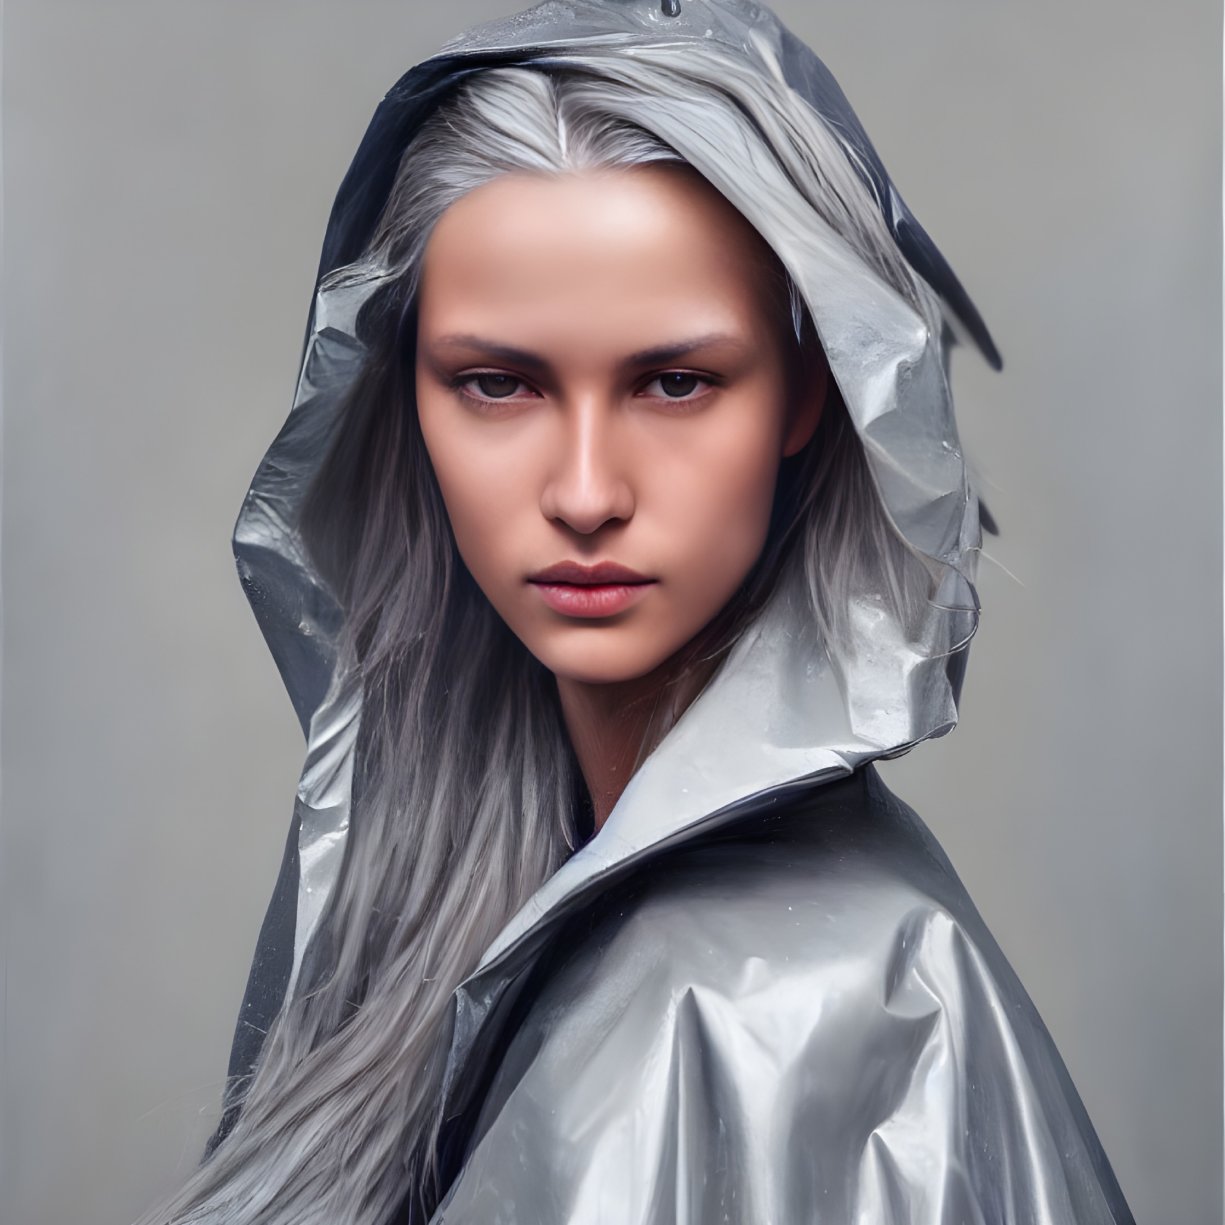 Silver-haired person in metallic jacket on gray background